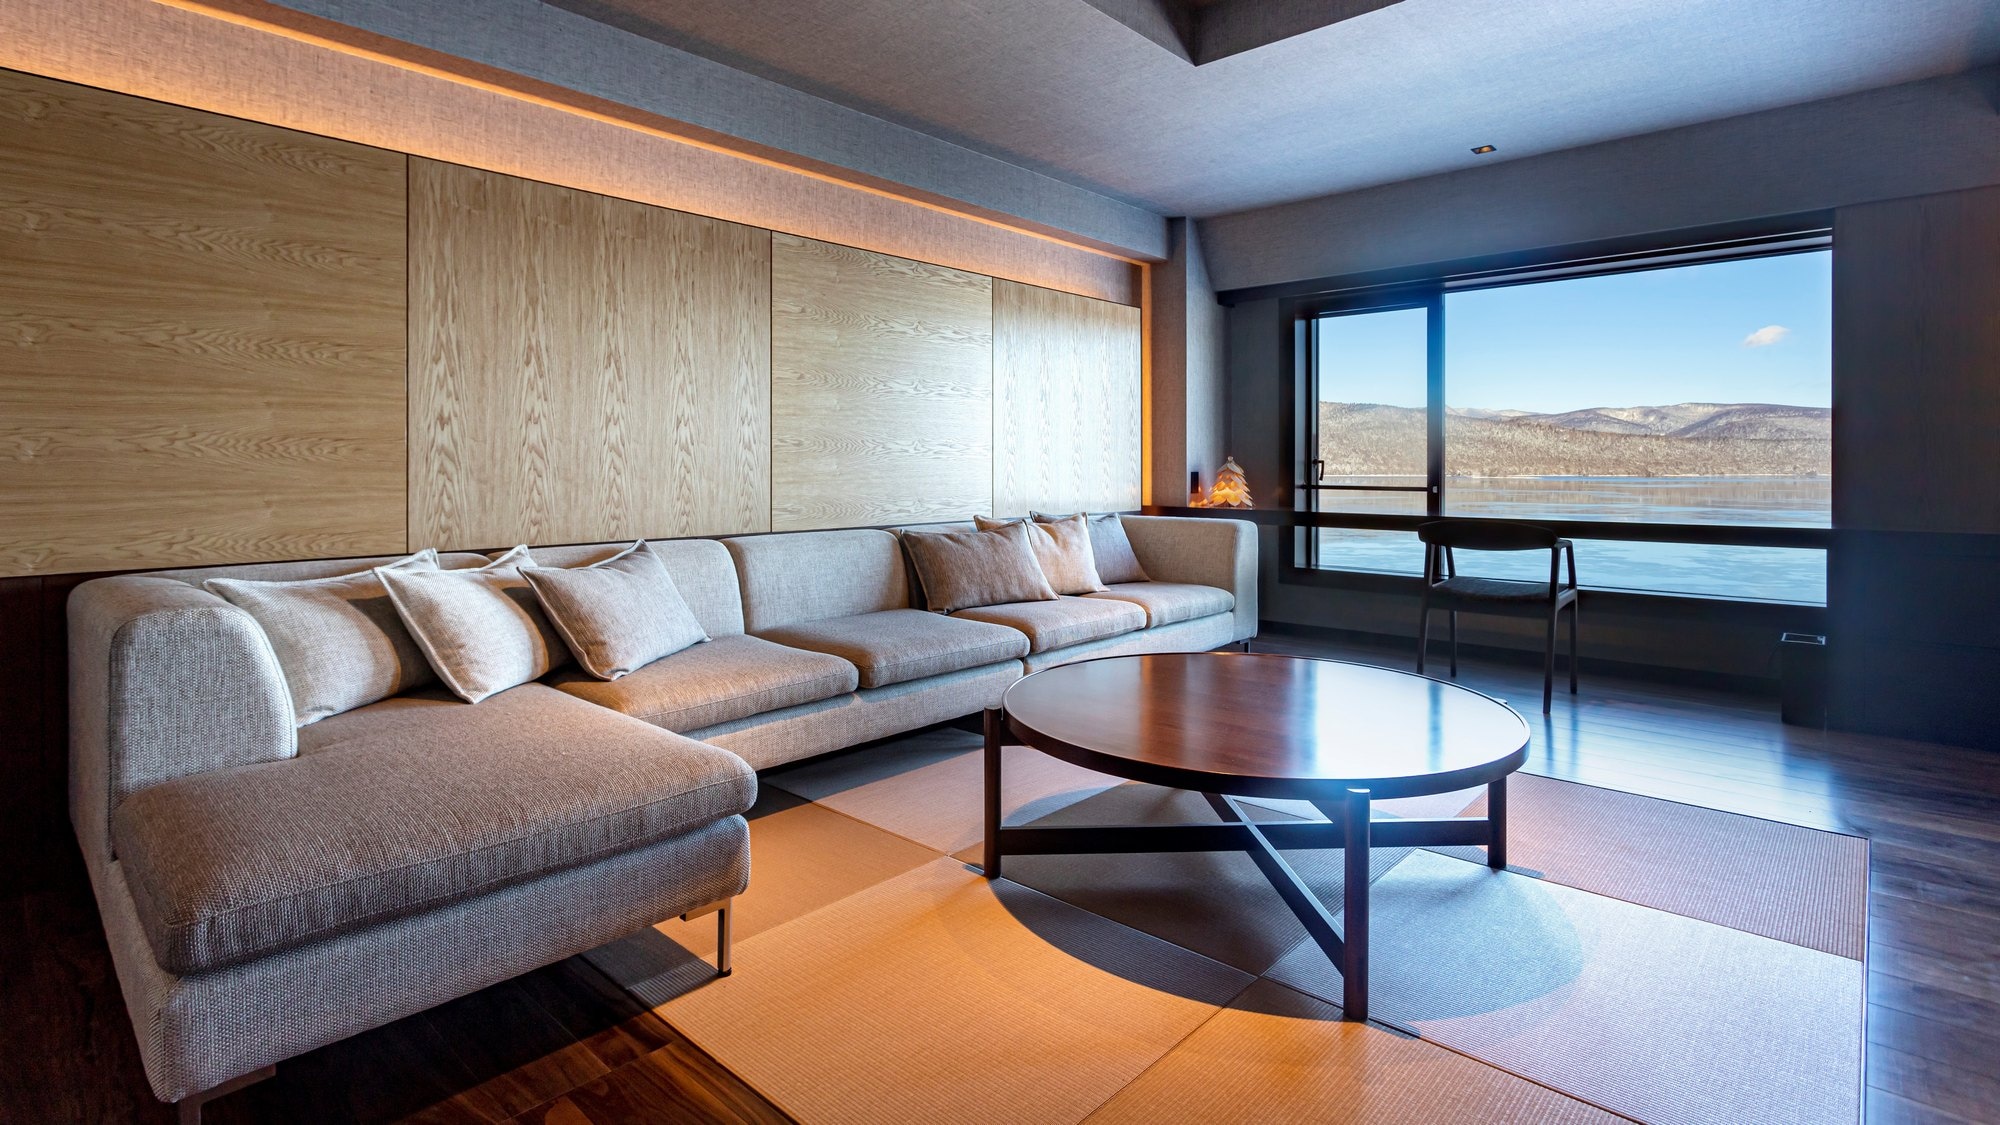 [Lake side] Example of DX Japanese-Western style room (with bath) / living room with large sofa (image)